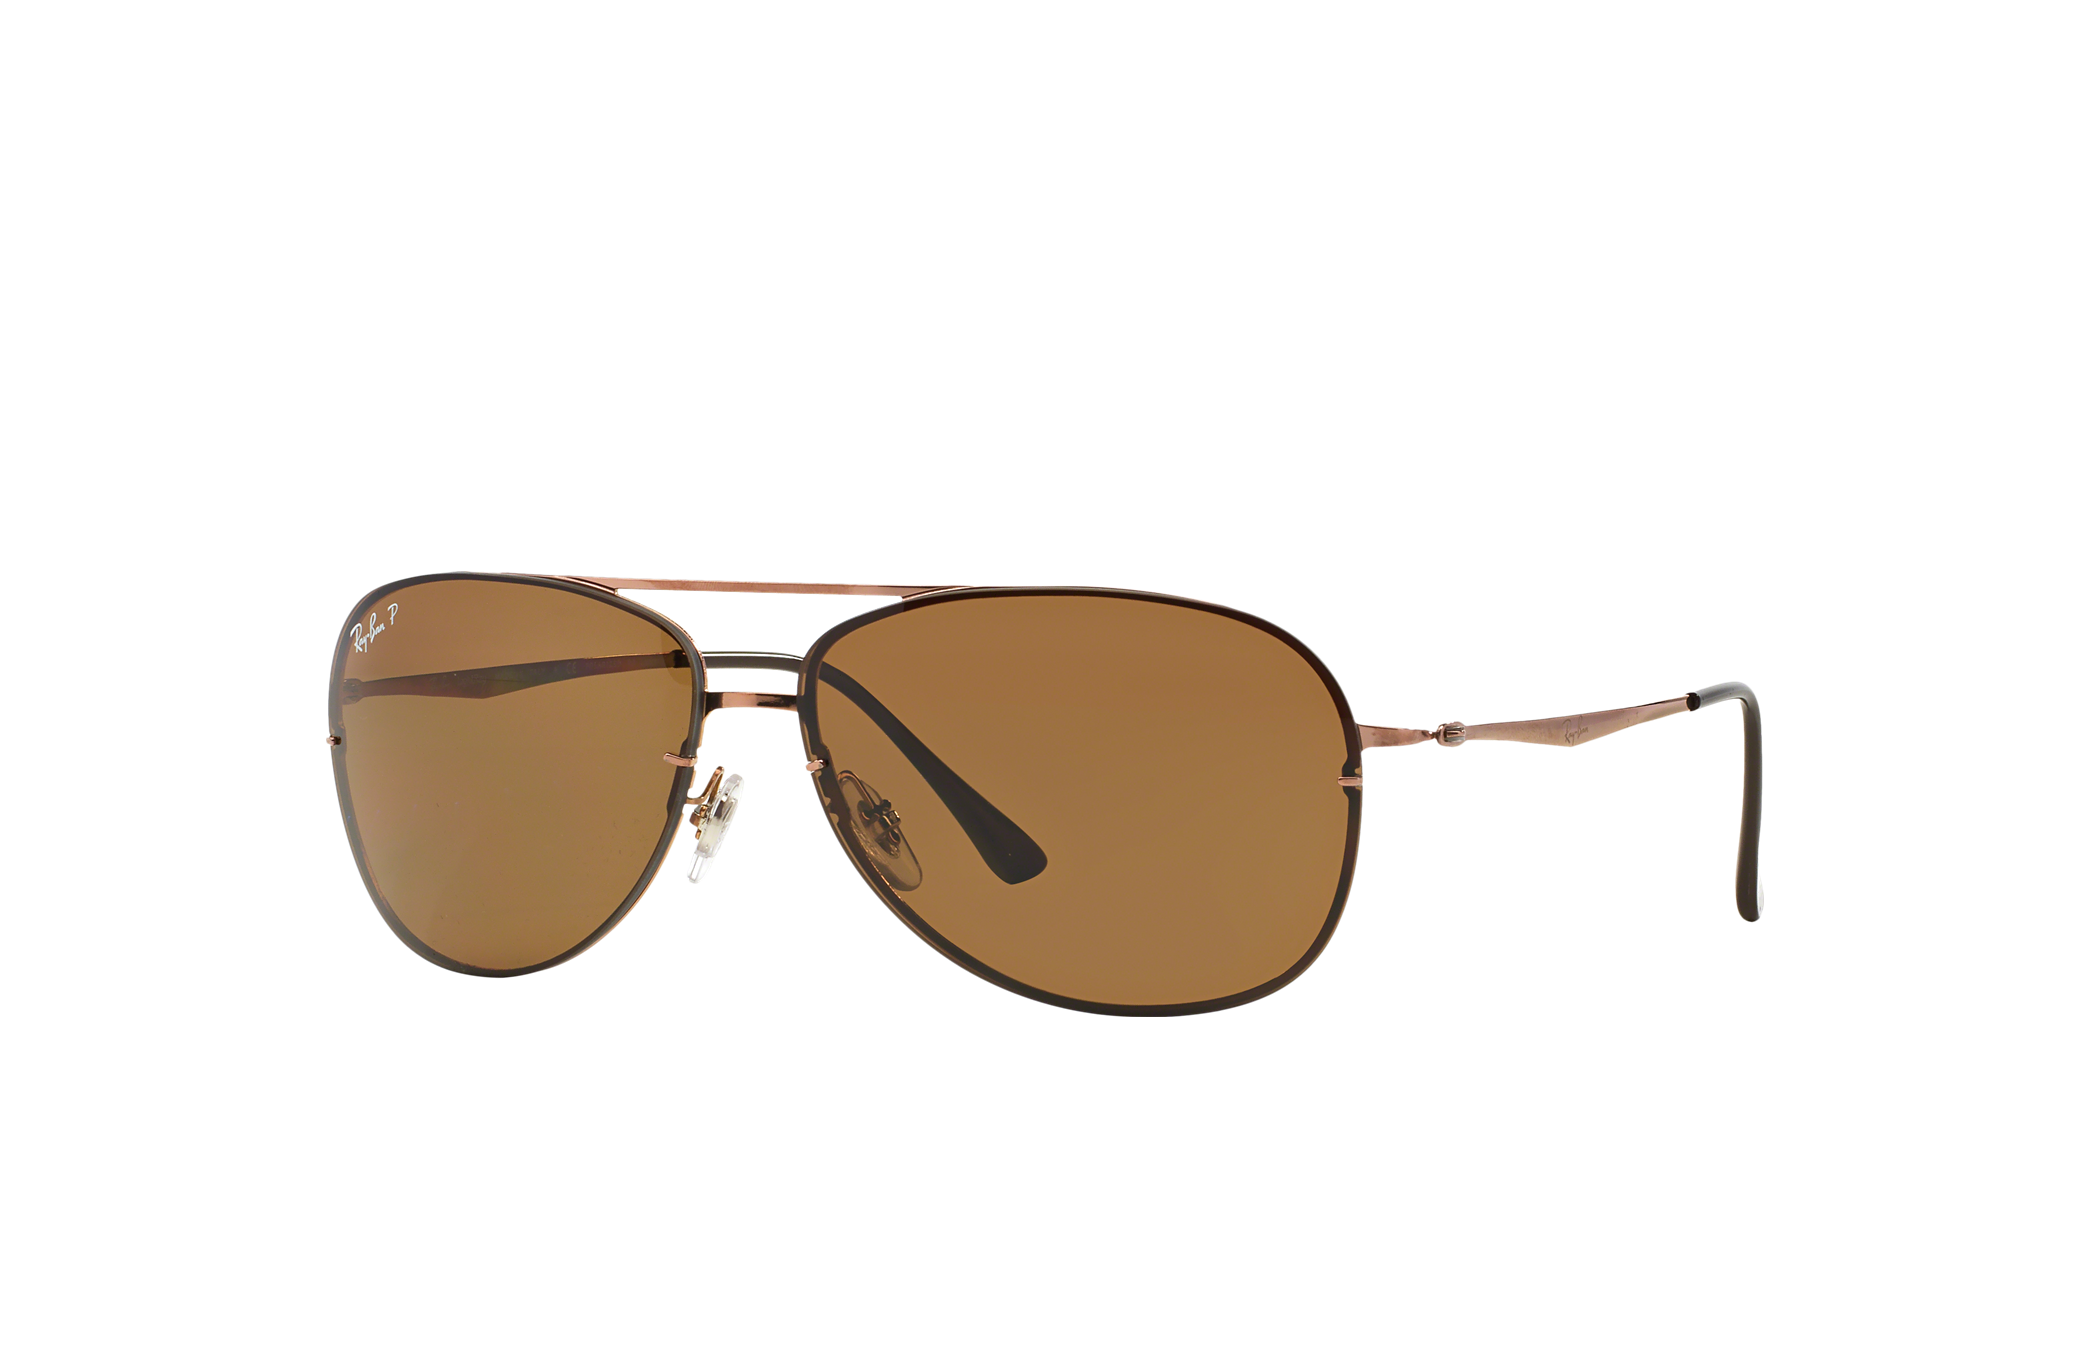 Rb8052 Sunglasses in Brown and Brown | Ray-Ban®